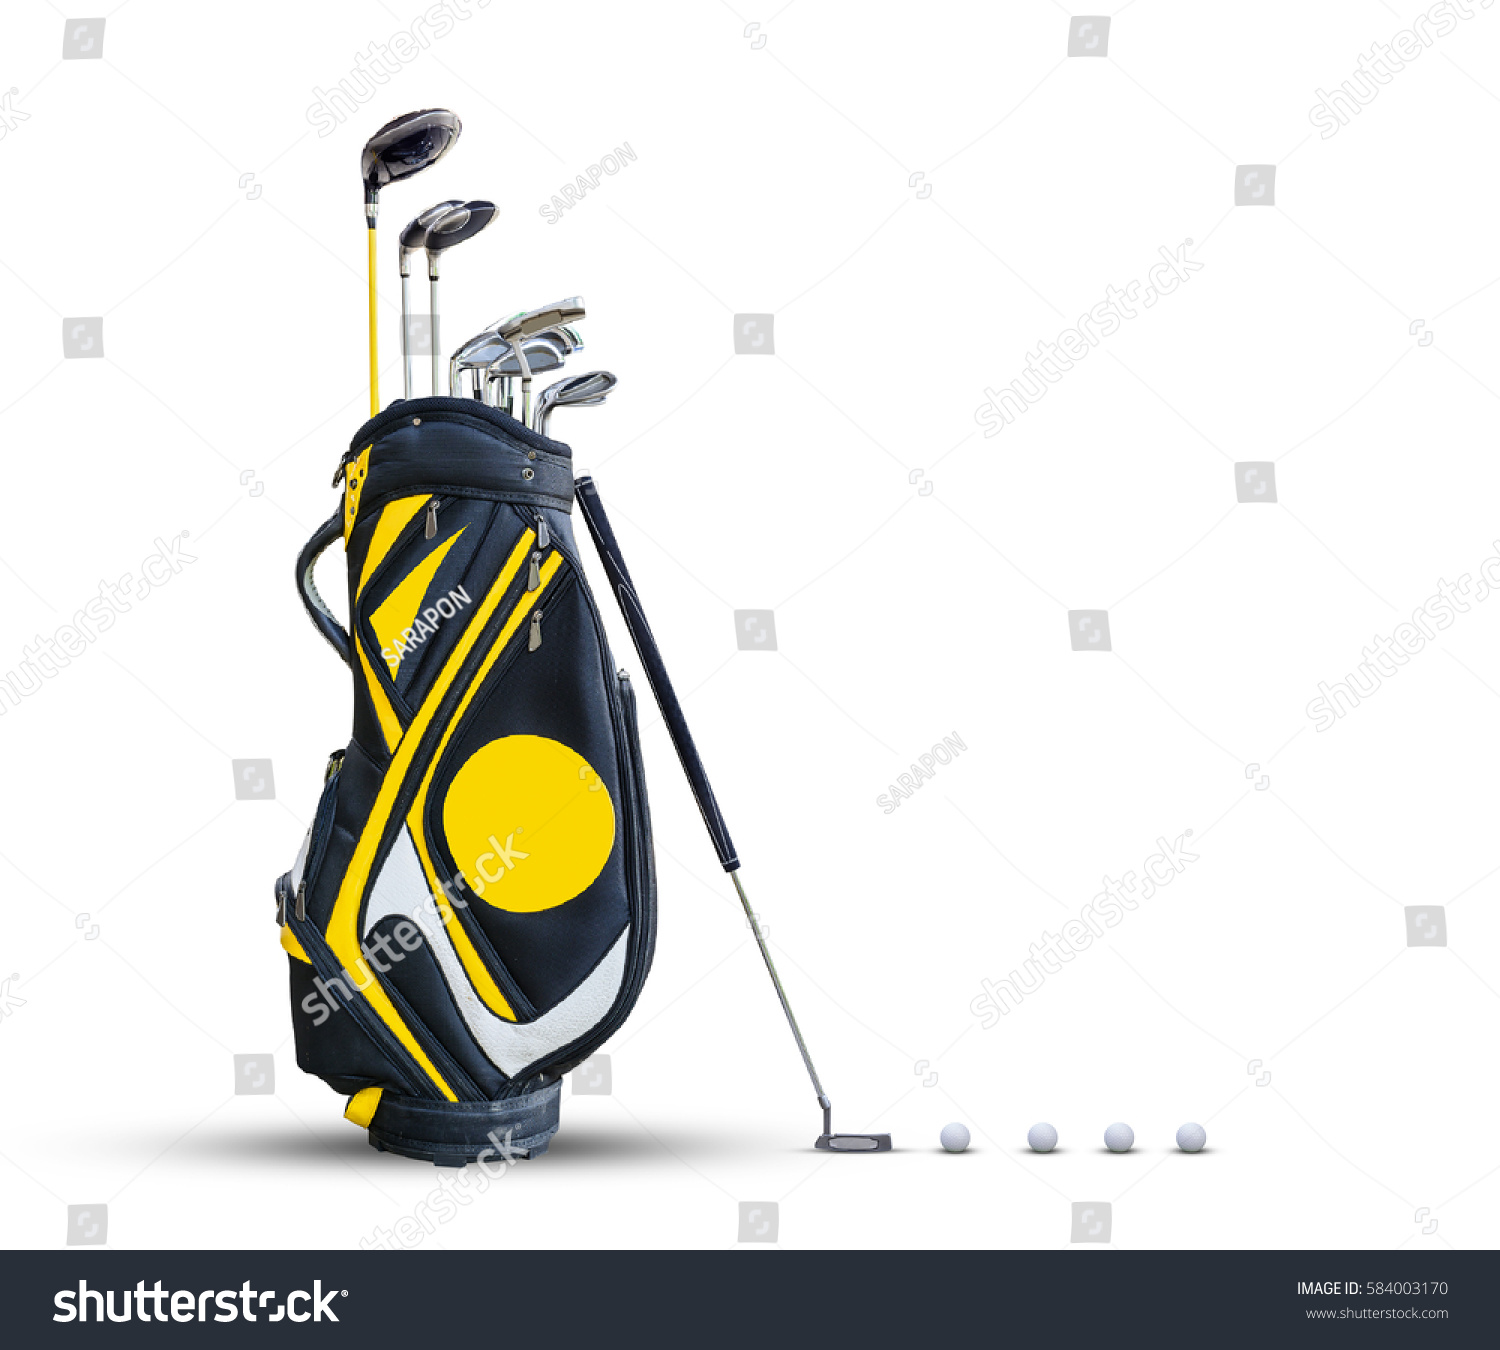 Golf equipment golf ball and golf bag isolated on white background. #584003170